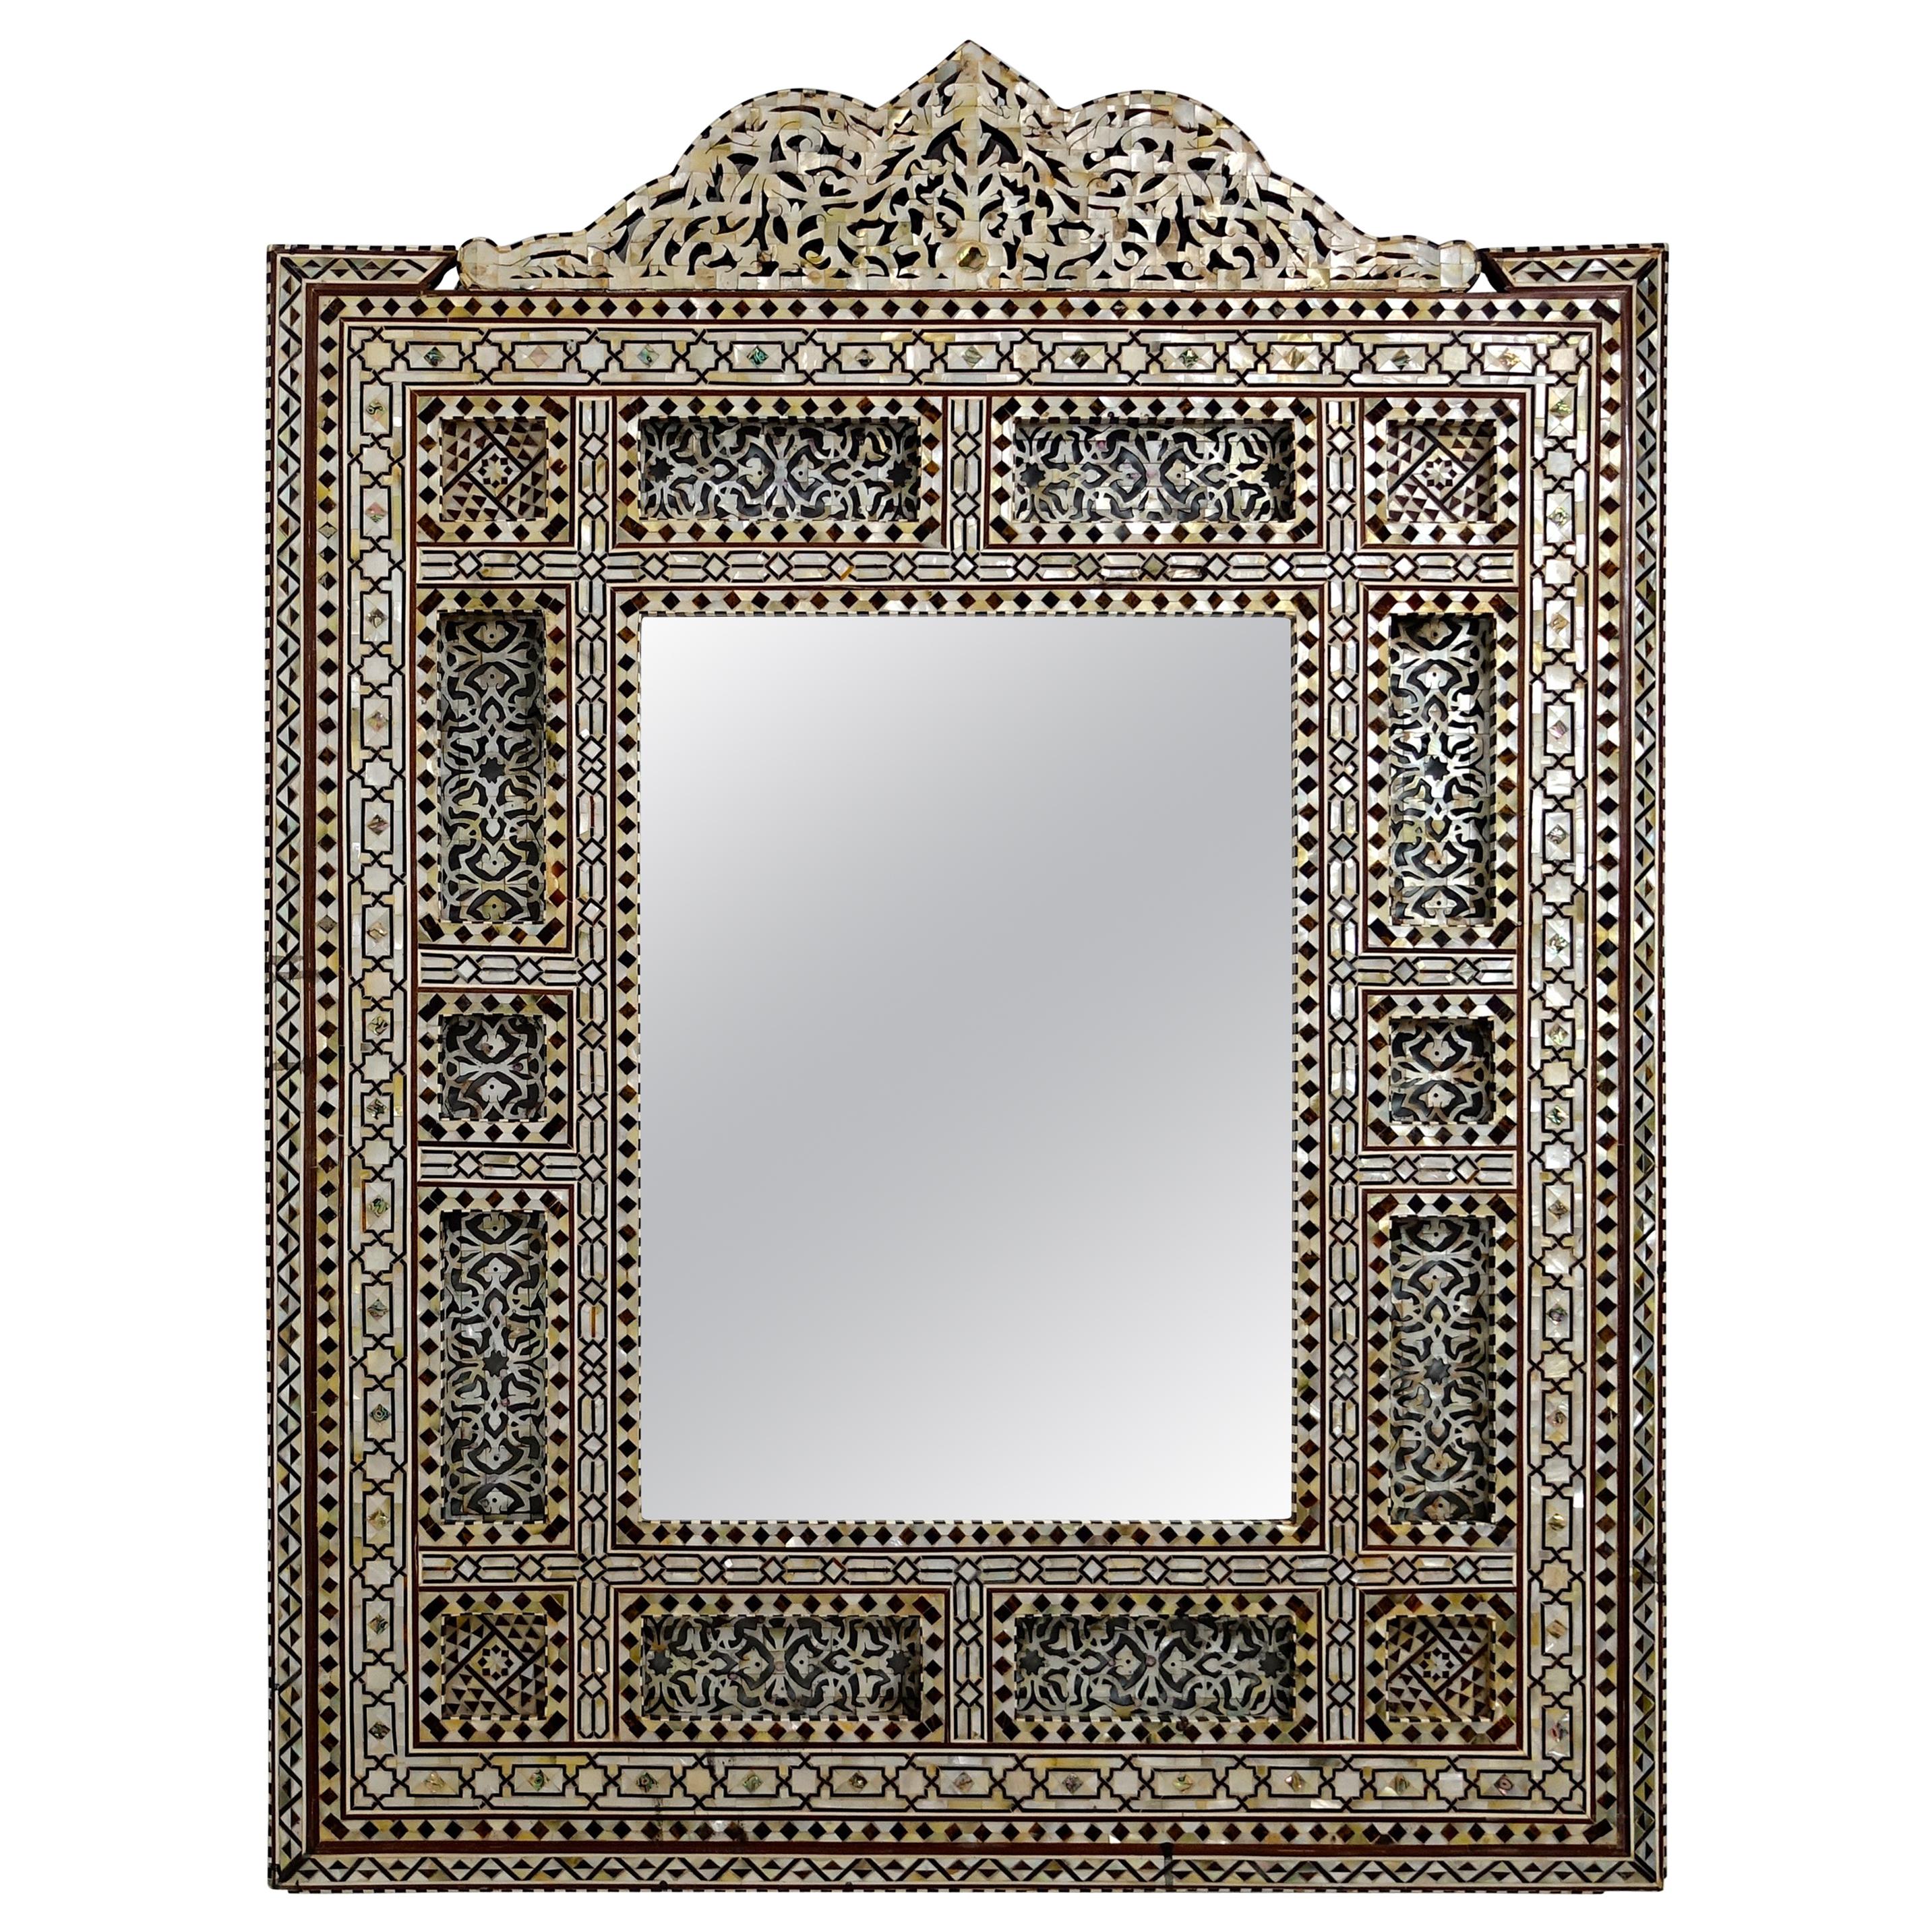 Elorborate Inlayed Syrian Frame with Mirror